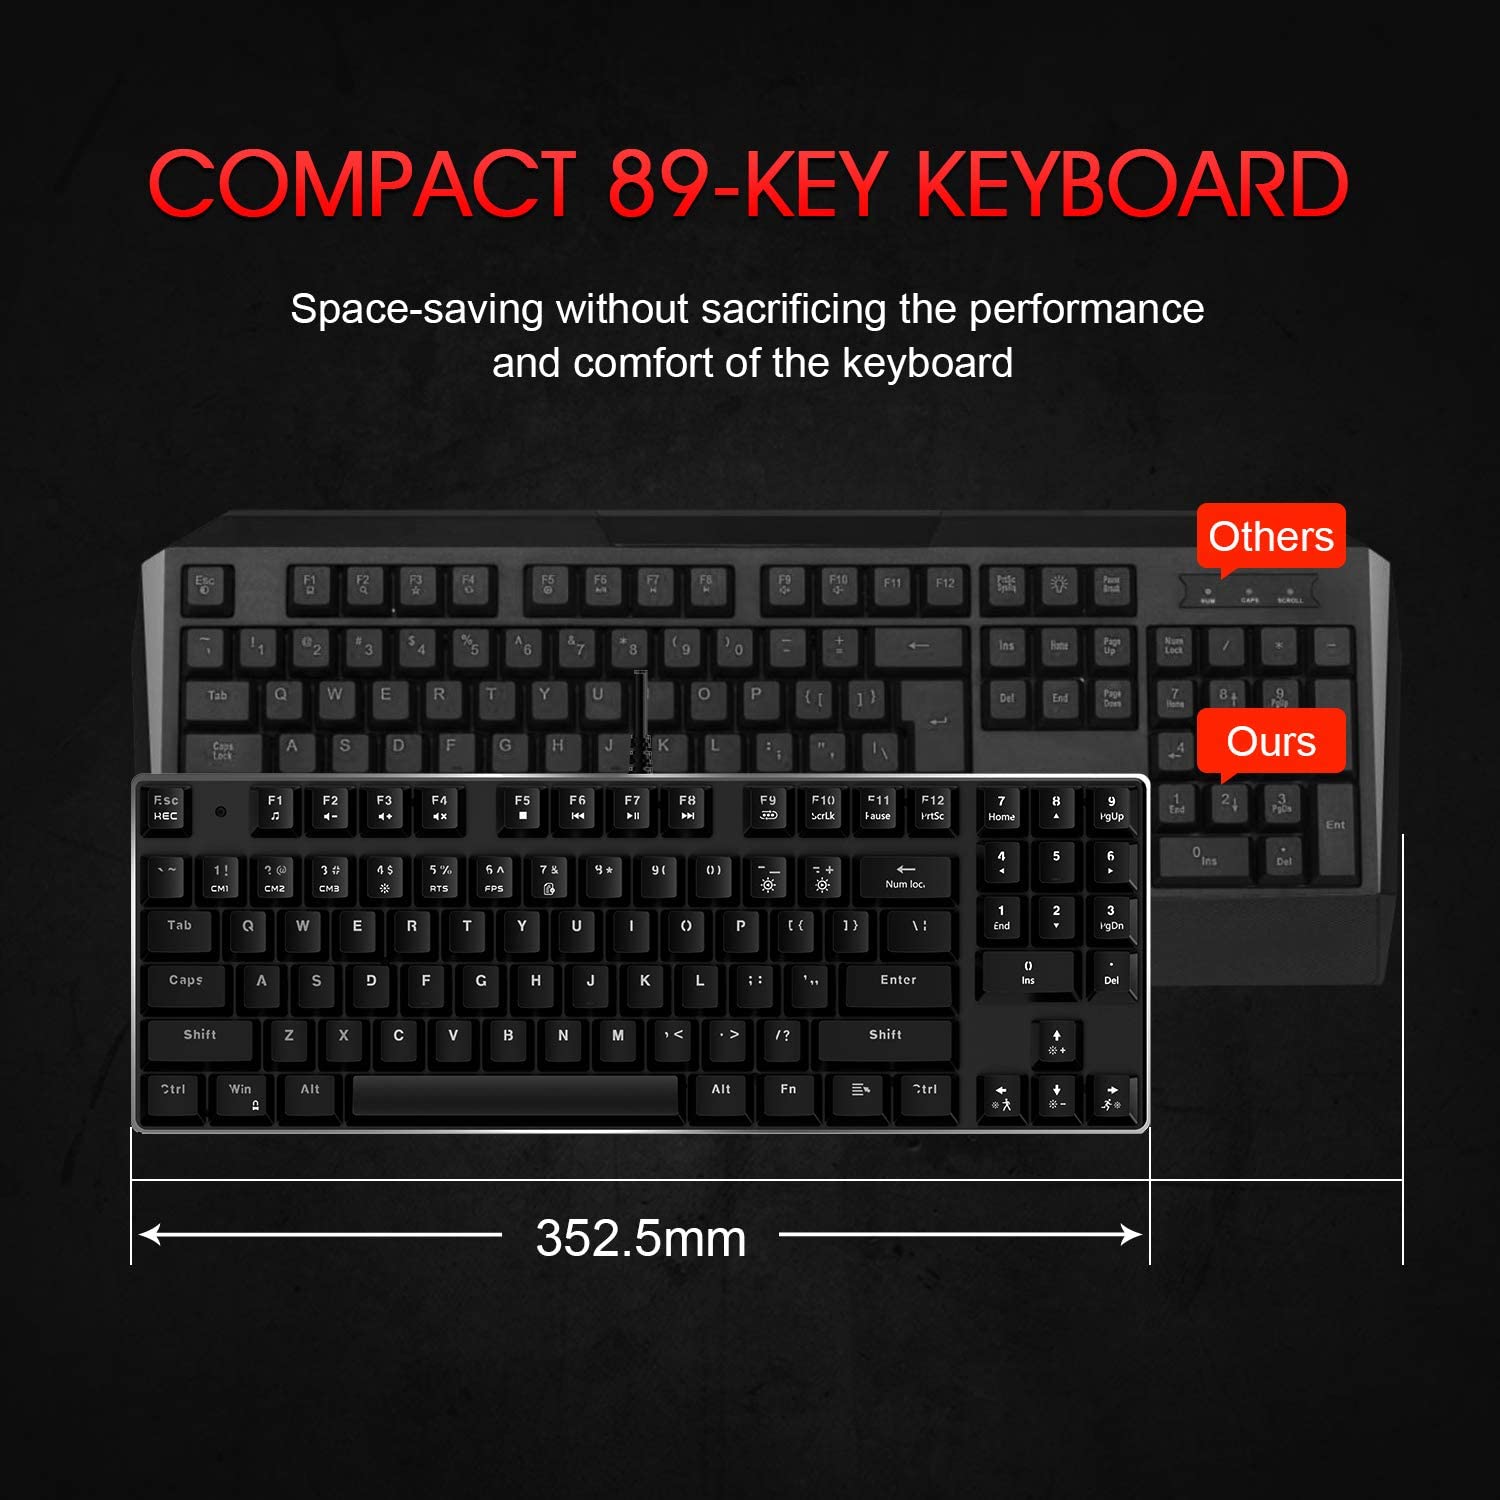 HAVIT KB486L Mechanical Keyboard Mouse & Mouse Pad Combo with 89 Keys Backlit Red Switch